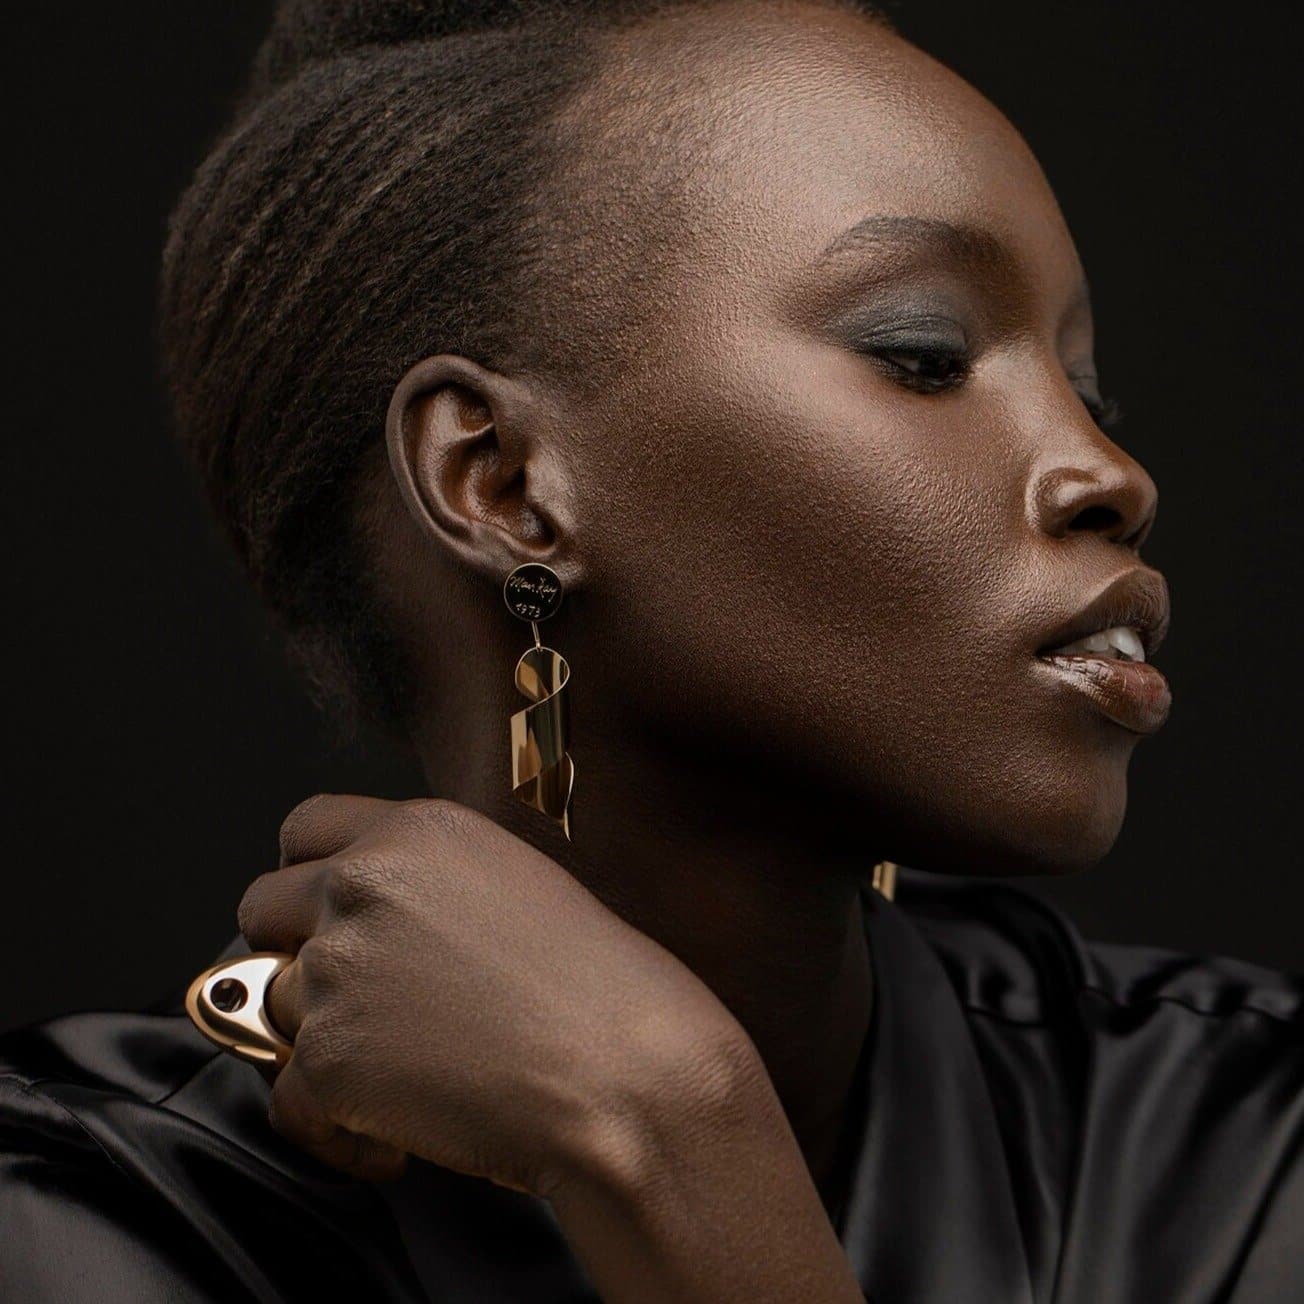 Ethically Sourced Gold Earrings for Women - Made in NYC